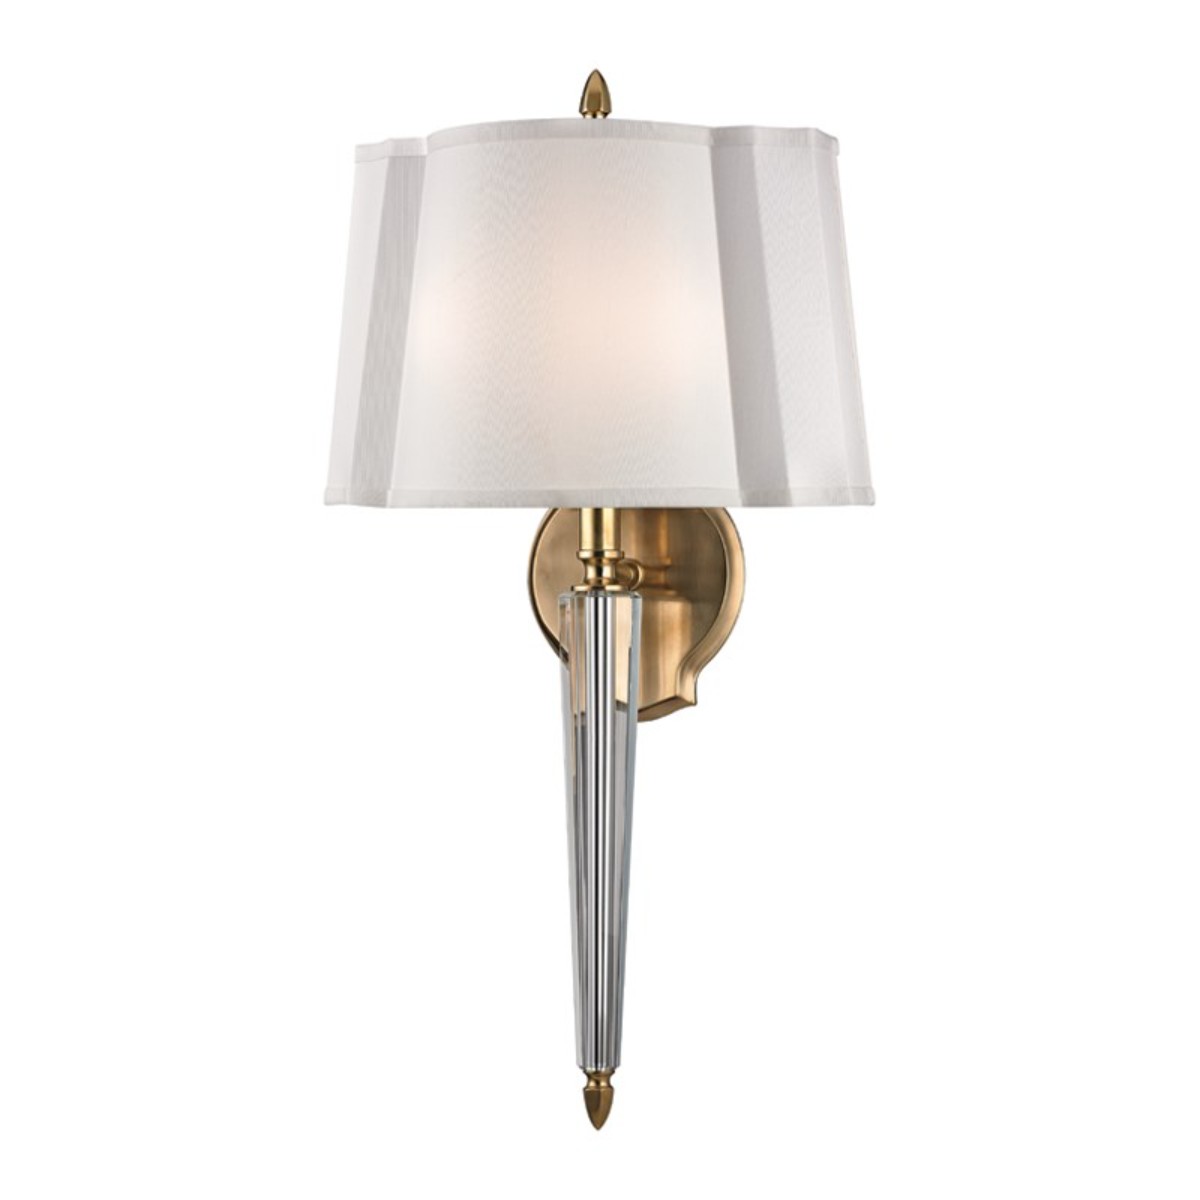 Hudson Valley I Oyster Bay Wall Sconce I Aged Brass